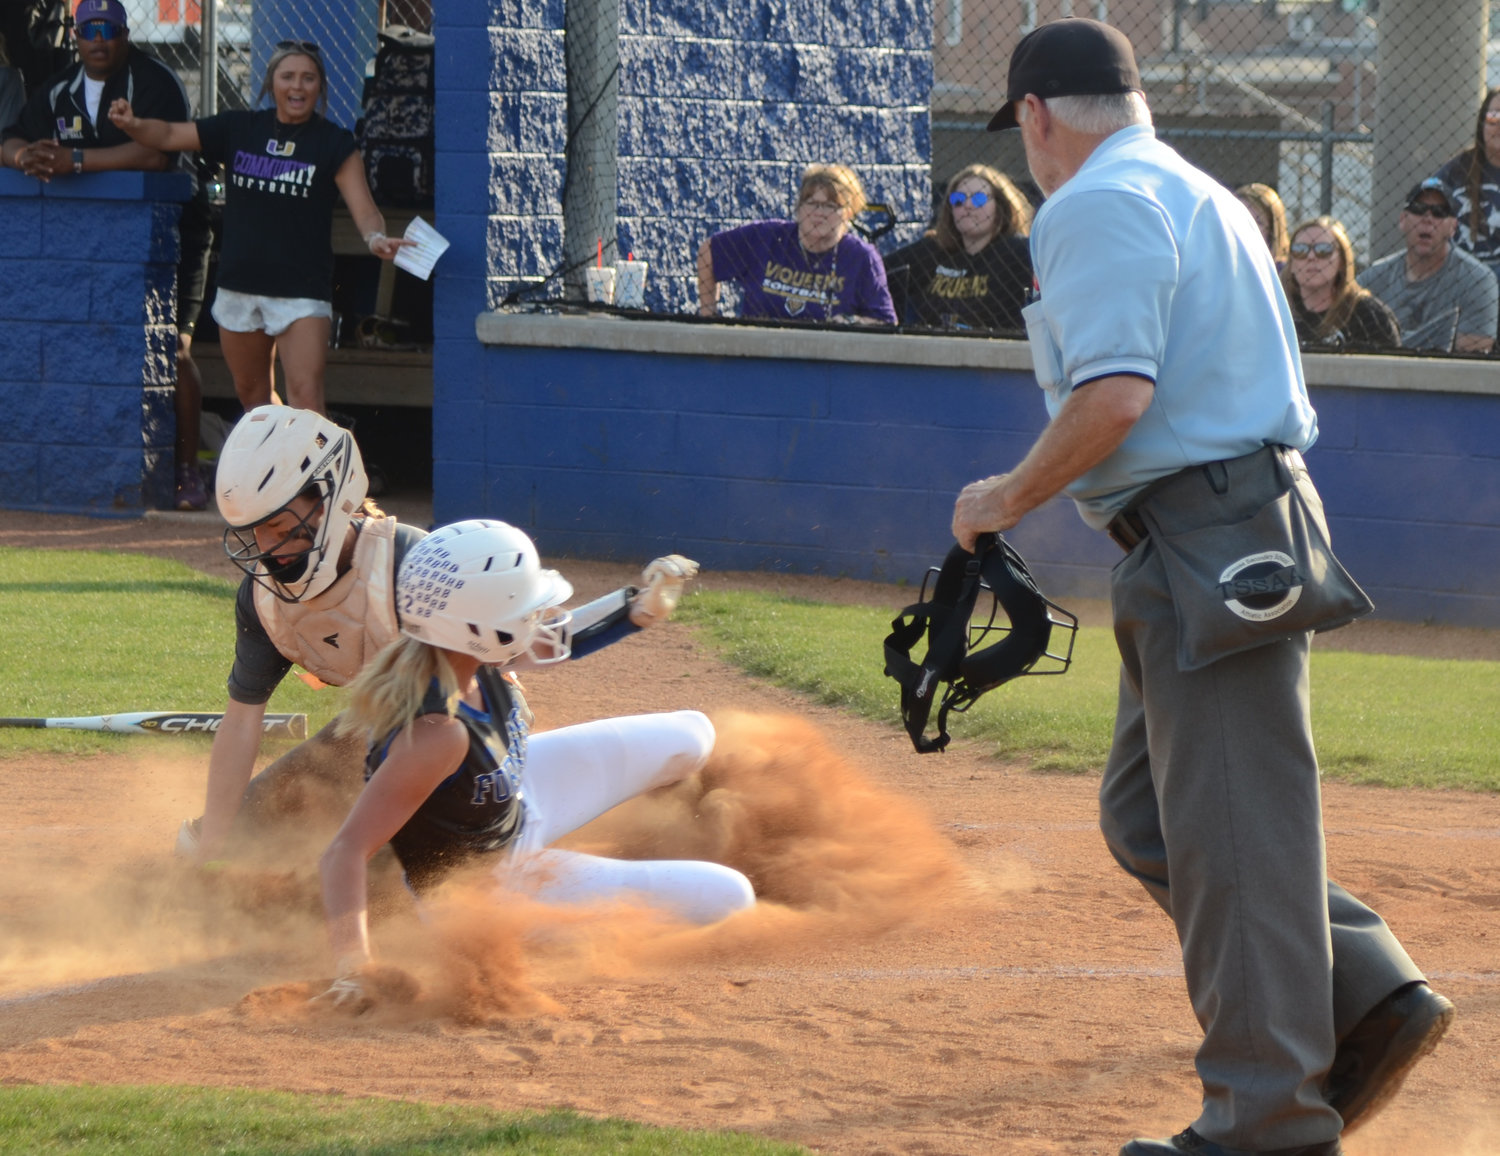 Macyn Kirby slides home in a cloud of dust to give Forrest a 1-0 lead.